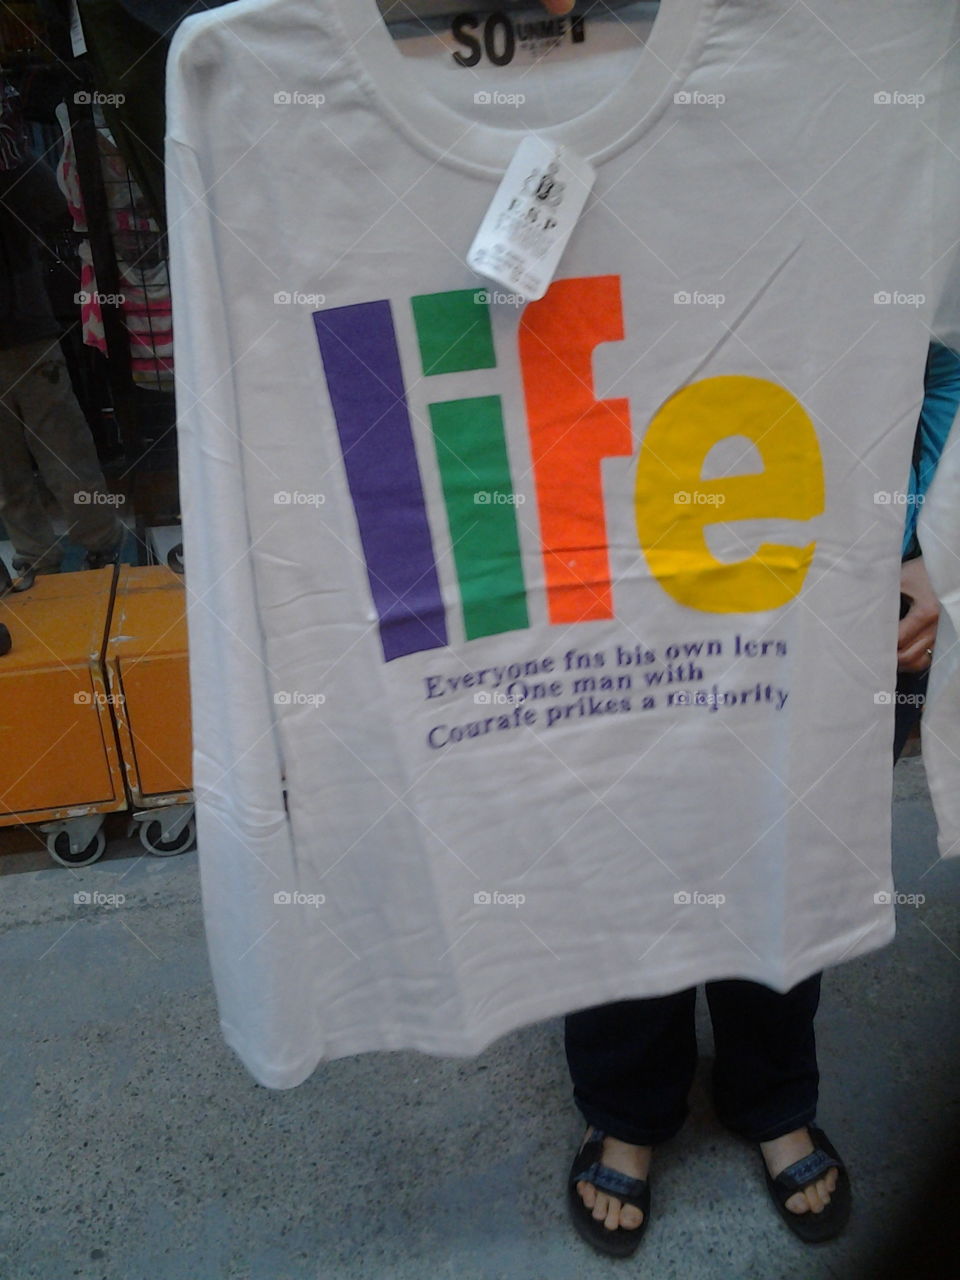 Another bizarre Engrish T-shirt found in Taipei.